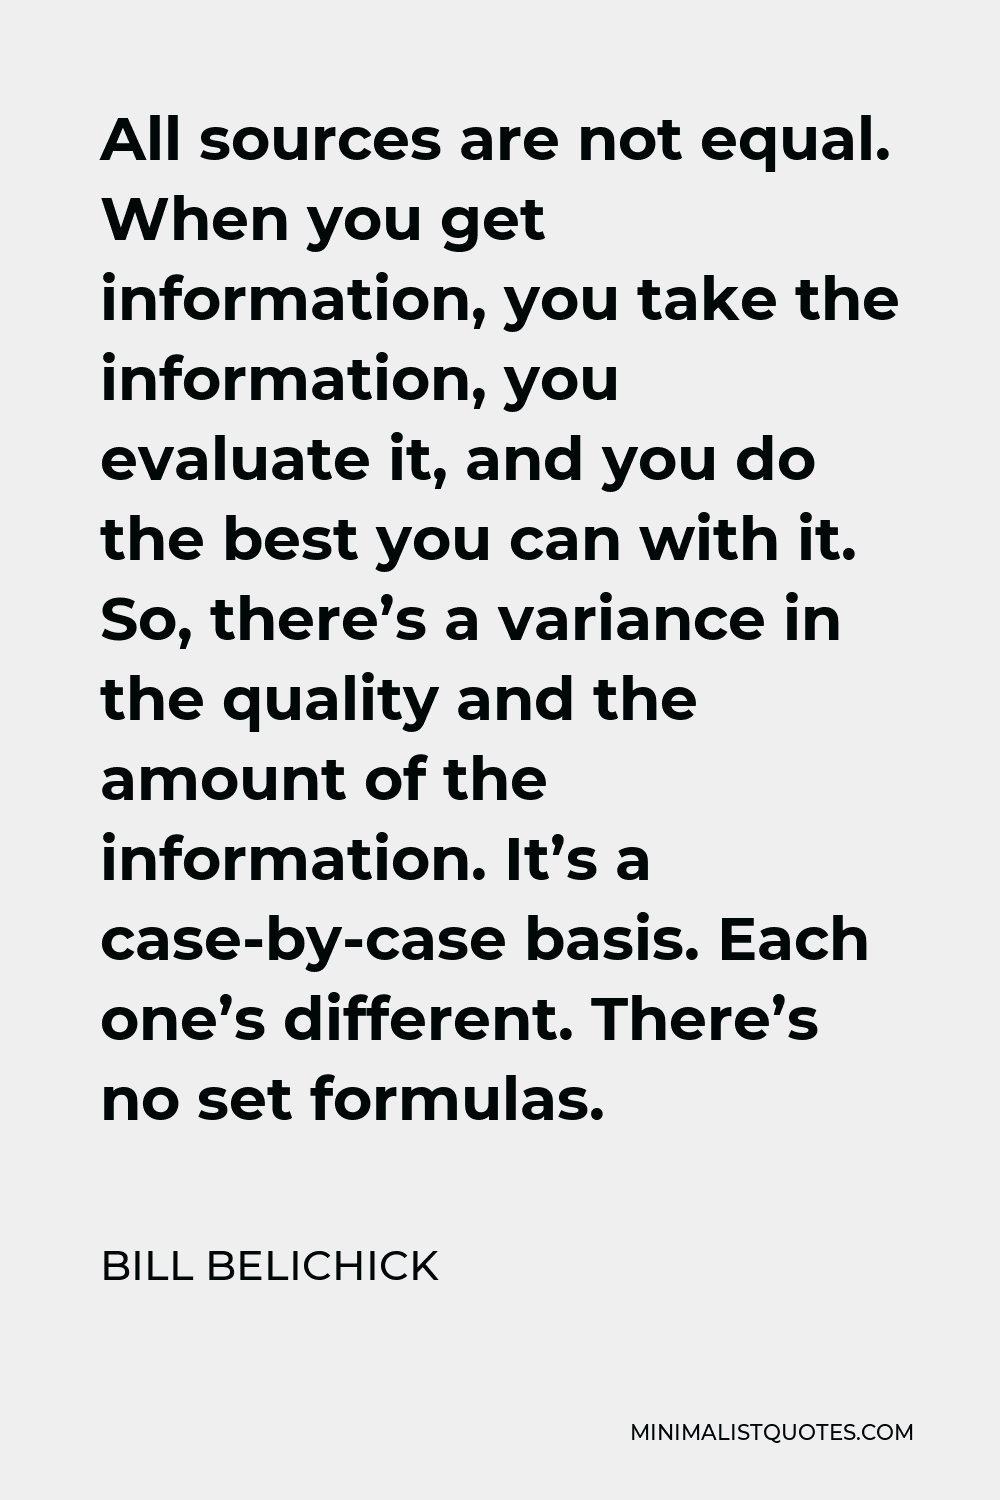 Bill Belichick Quote - All sources are not equal. When you get information, you take the information, you evaluate it, and you do the best you can with it. So, there’s a variance in the quality and the amount of the information. It’s a case-by-case basis. Each one’s different. There’s no set formulas.